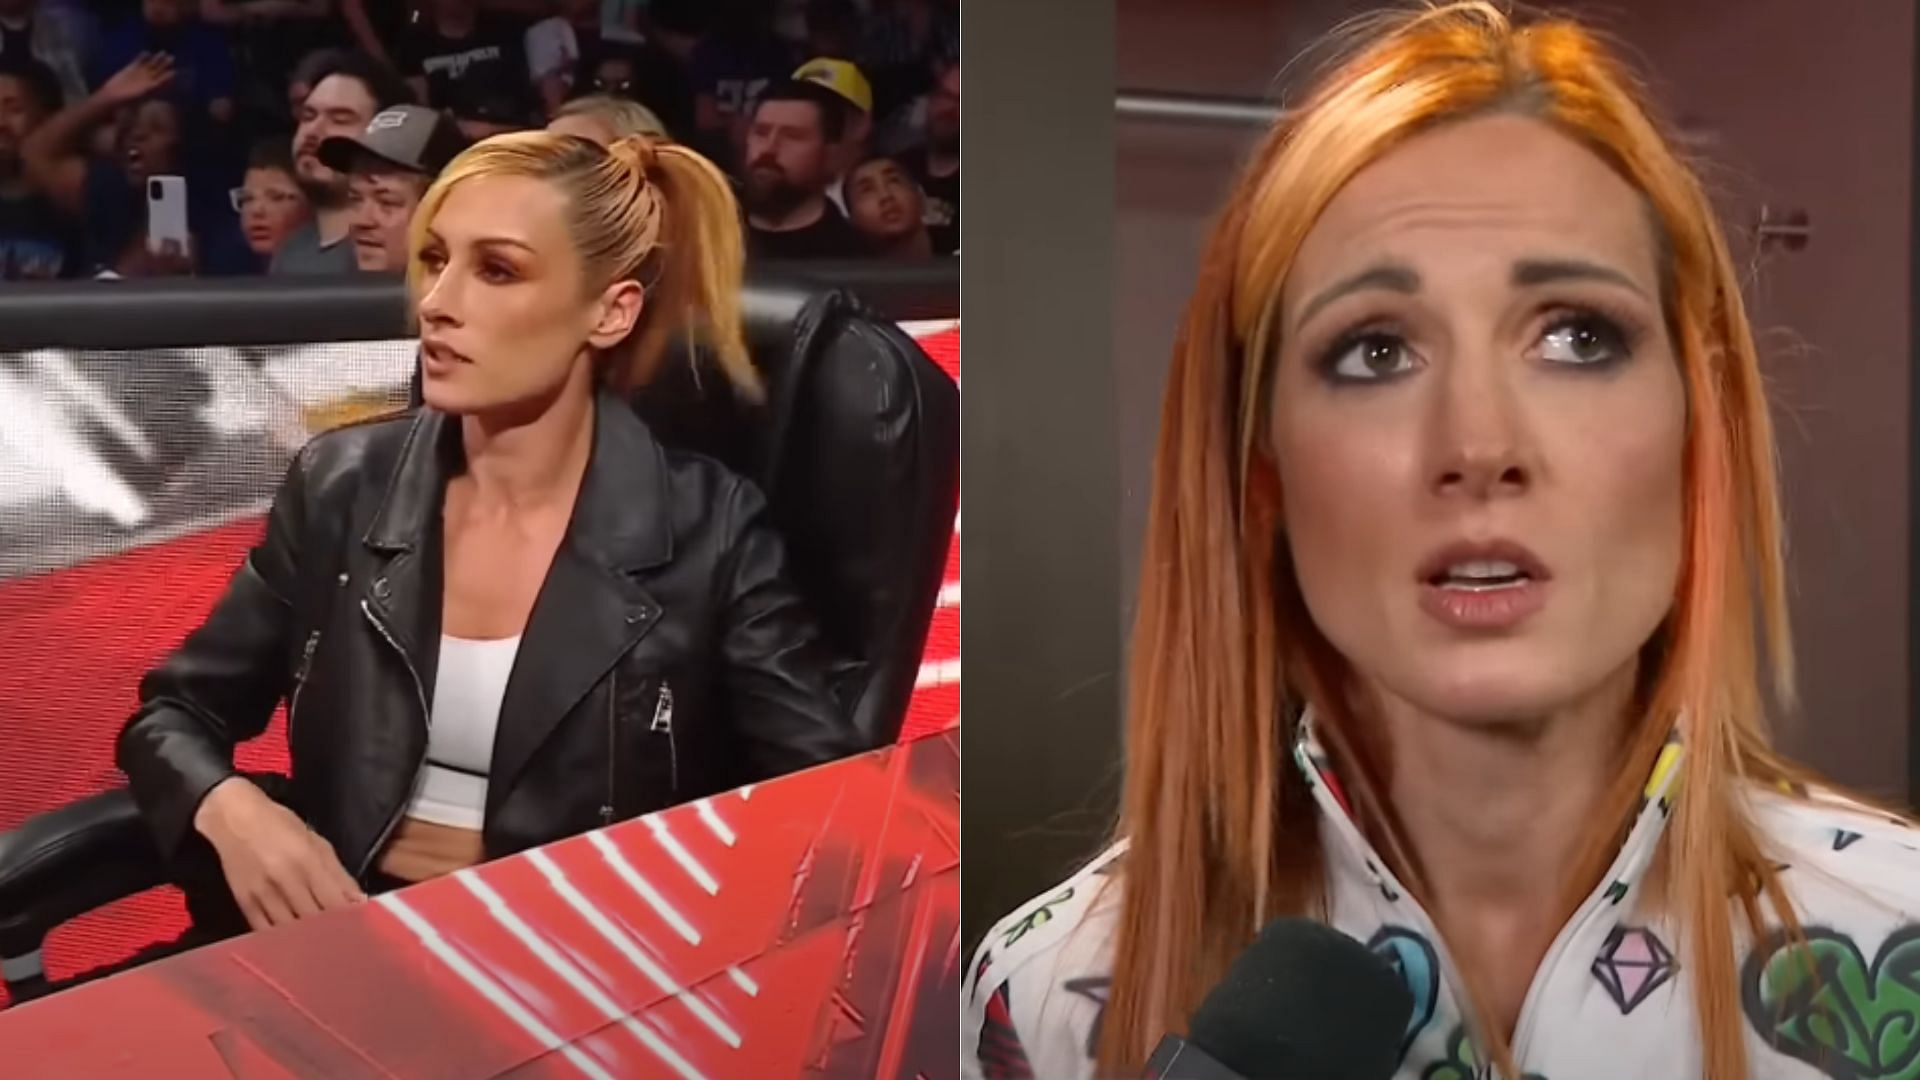 Becky Lynch did not compete at SummerSlam